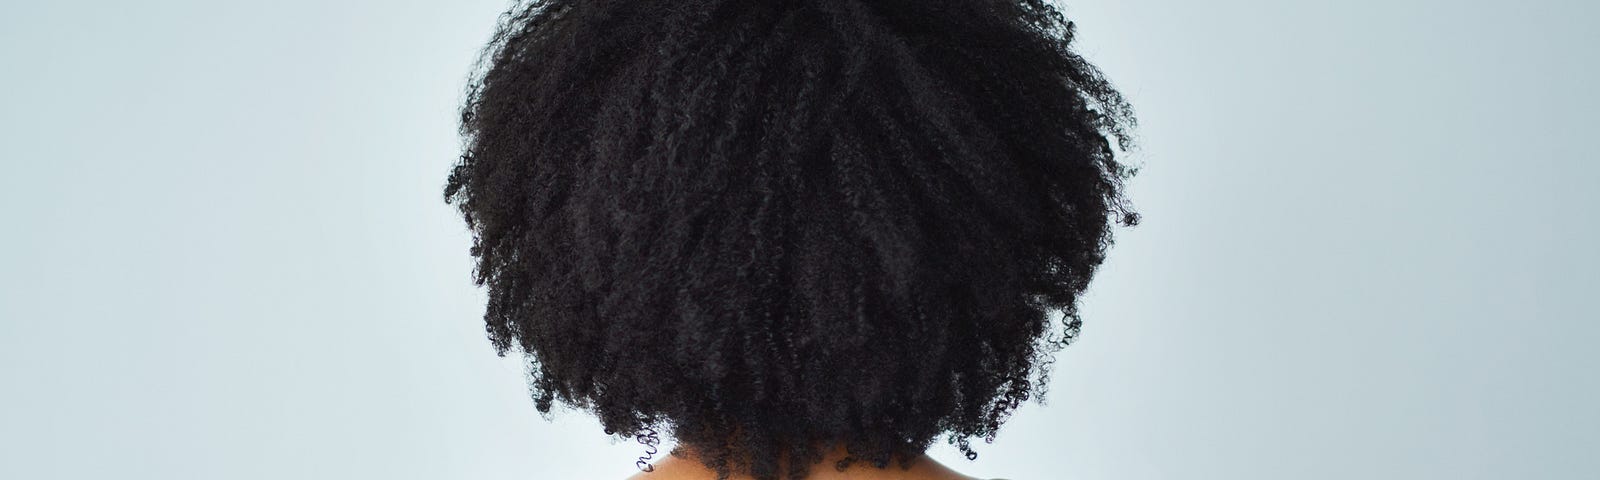 Back view of a Black woman with natural hair.